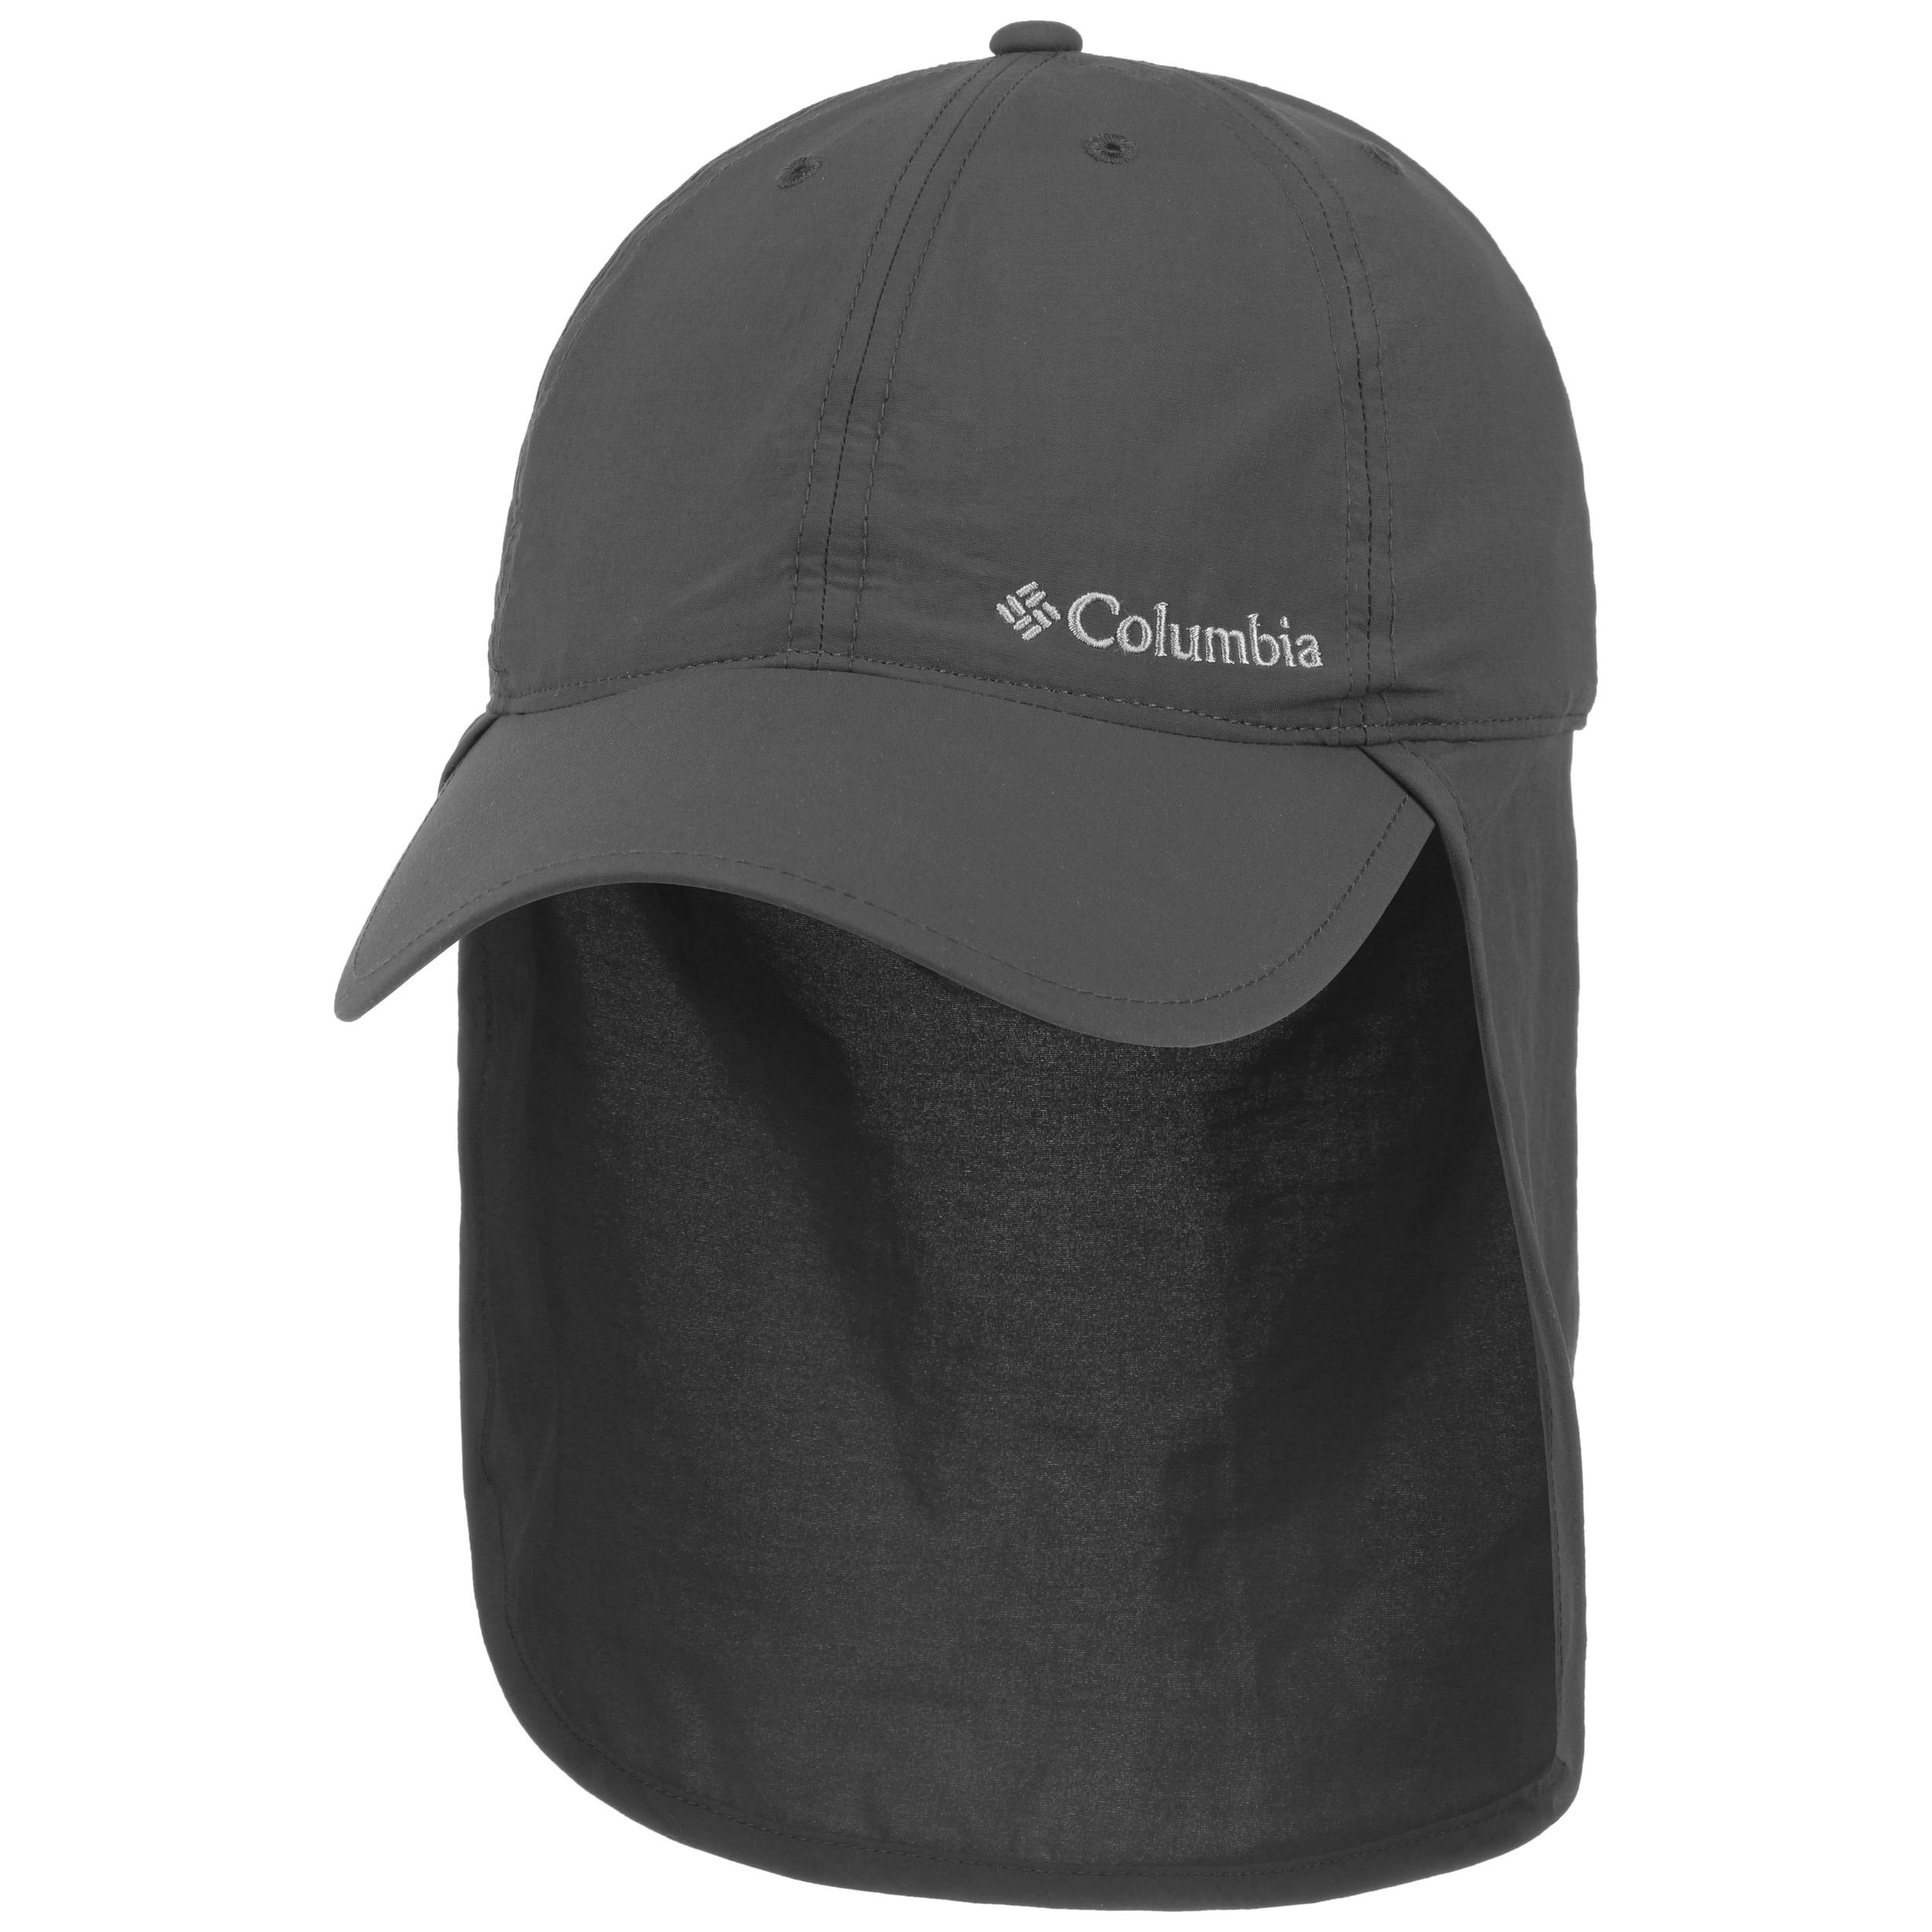 Schooner Cap with Neck Protection by Columbia - 35,95 €